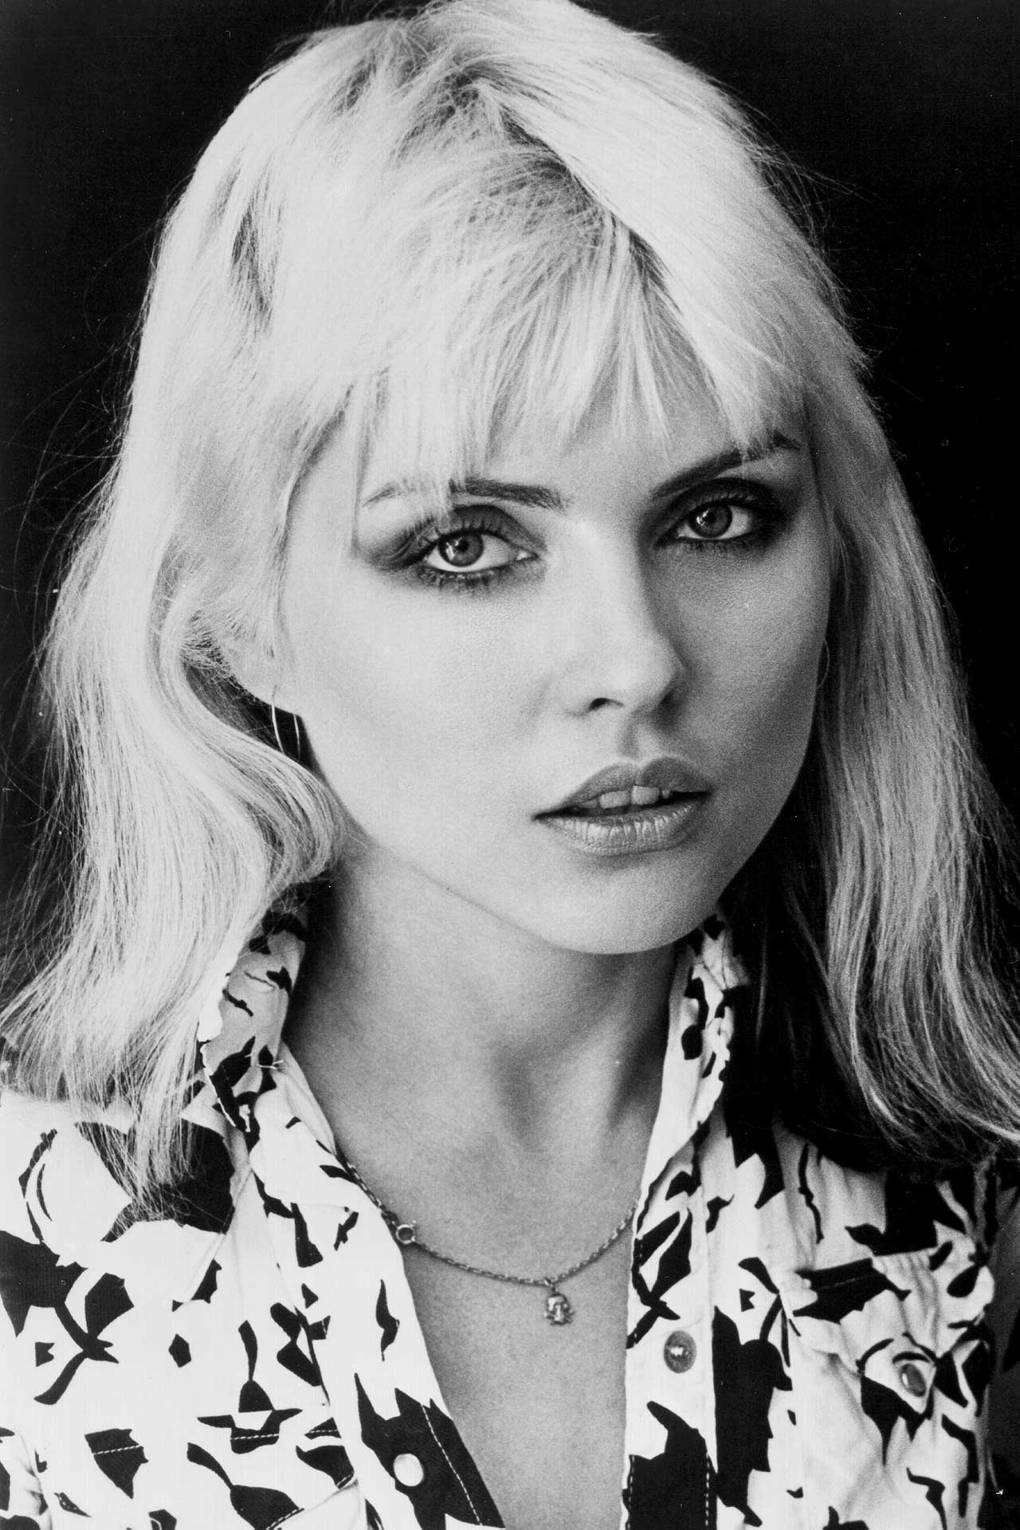 Blondie S Style Fashion And Iconic Looks Debbie Harry Glamour Uk